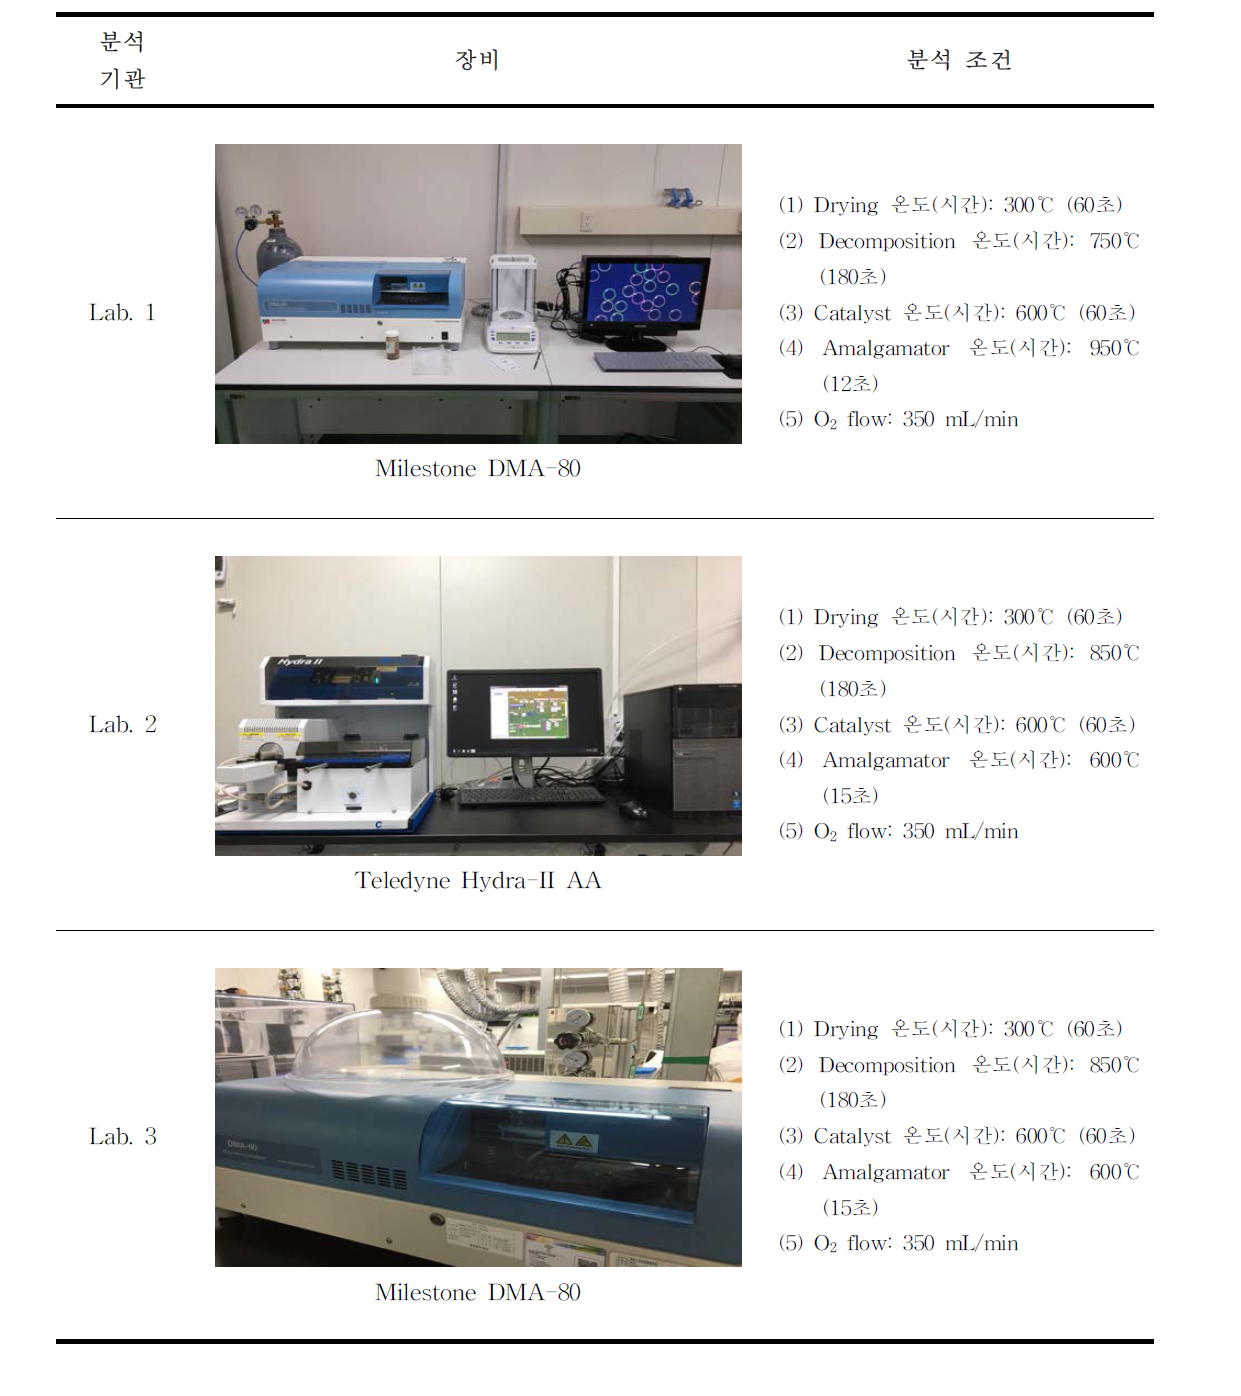 Instruments and operating conditions for MeHg analysis